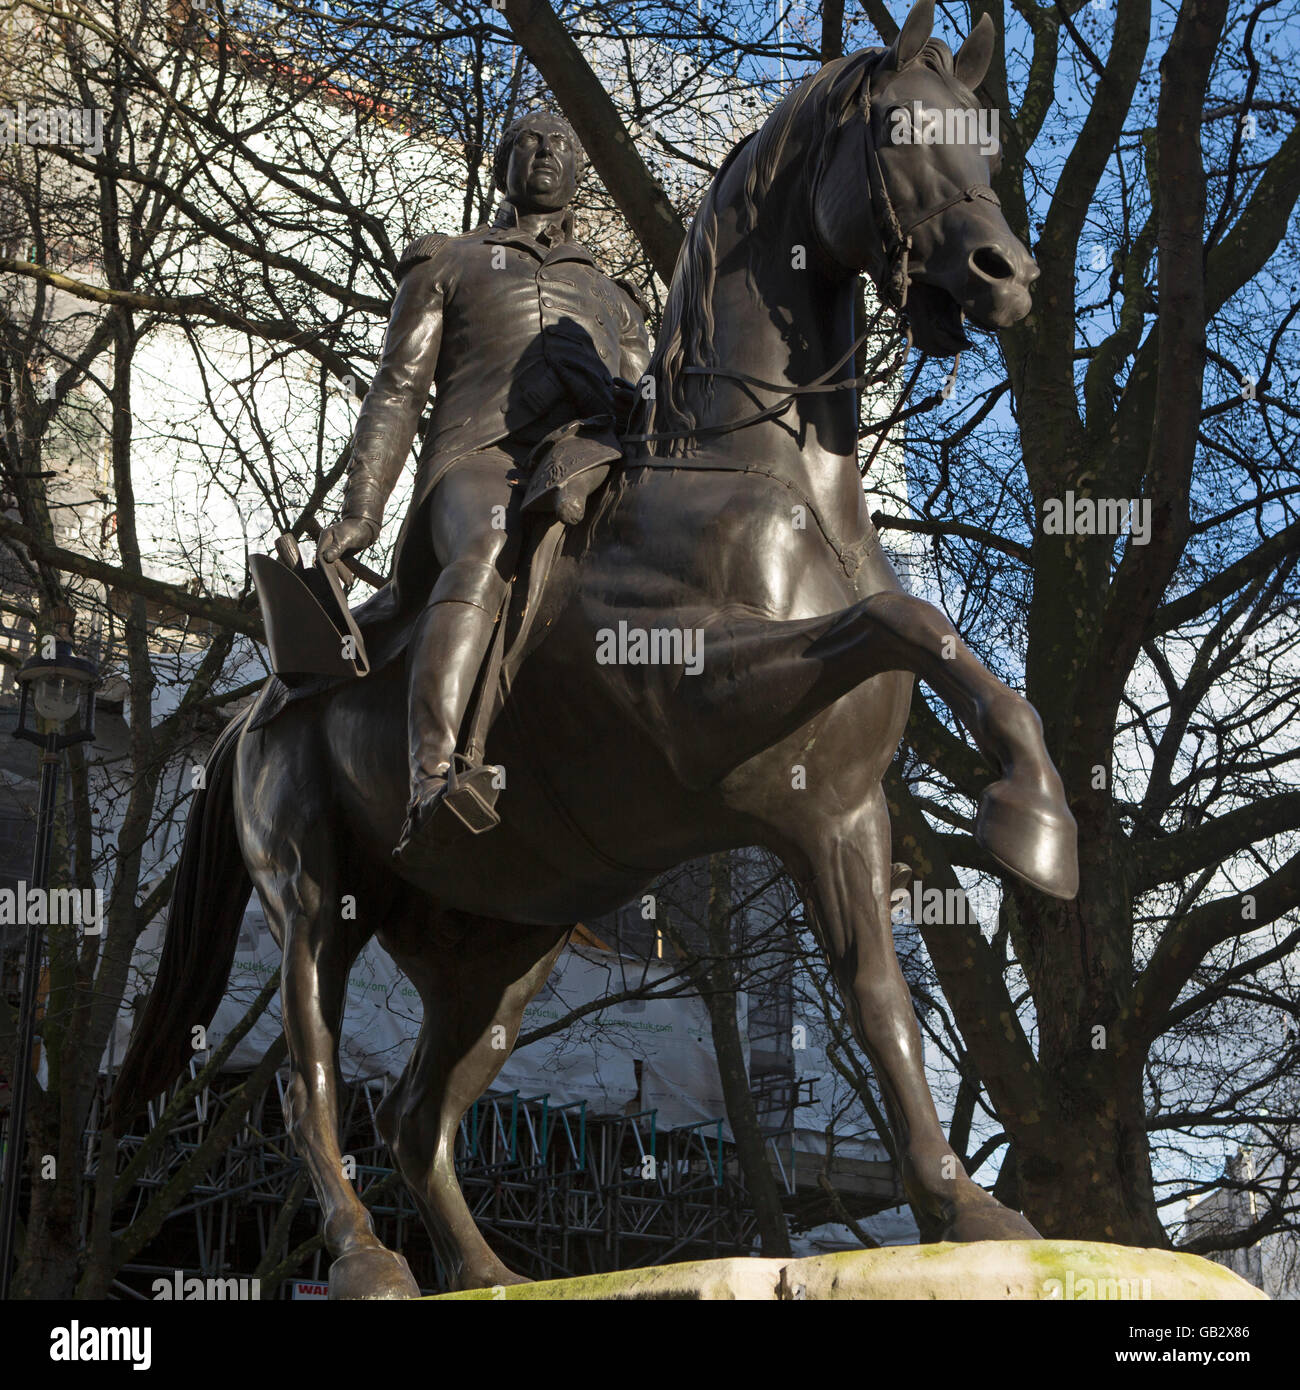 Statue of King George III on Pall Mall in London, England. The king rides a horse. Stock Photo